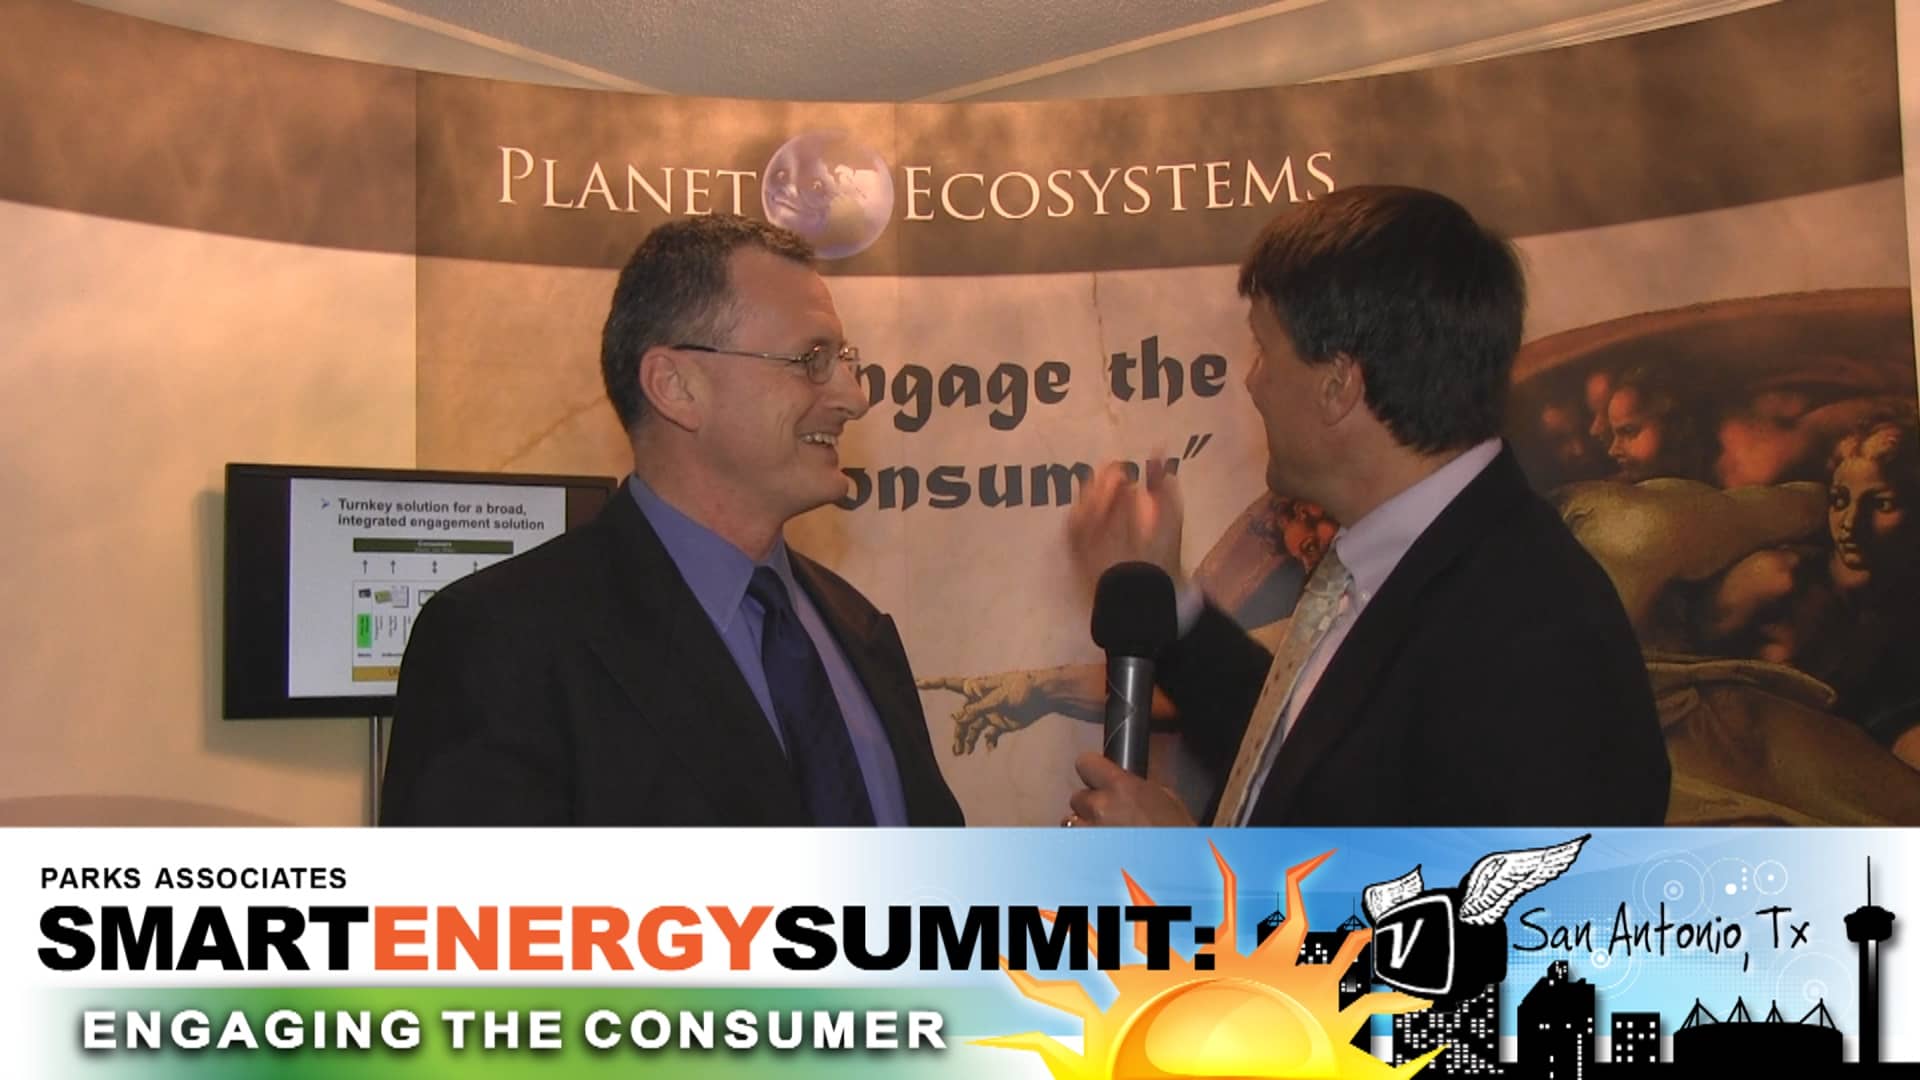 Rory Jones is interviewed by Ken Pyle at the 2013 Smart Energy Summit.